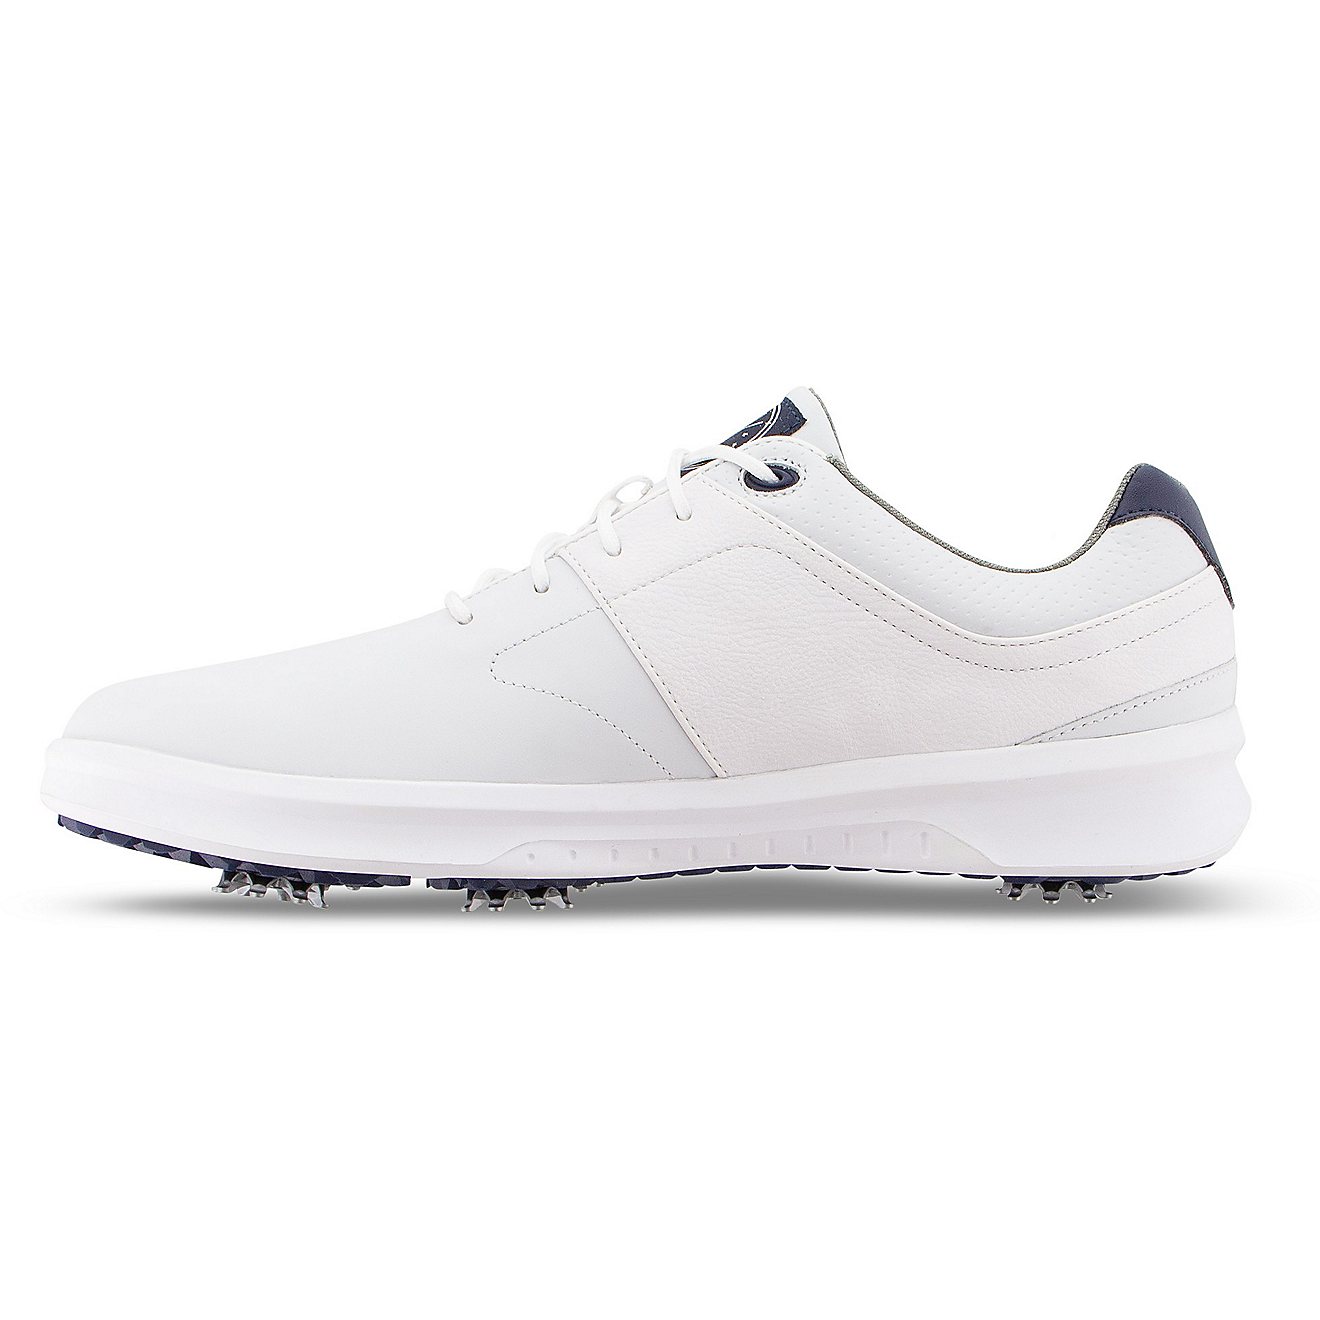 FootJoy Men's Contour Series Spiked Golf Shoes                                                                                   - view number 2